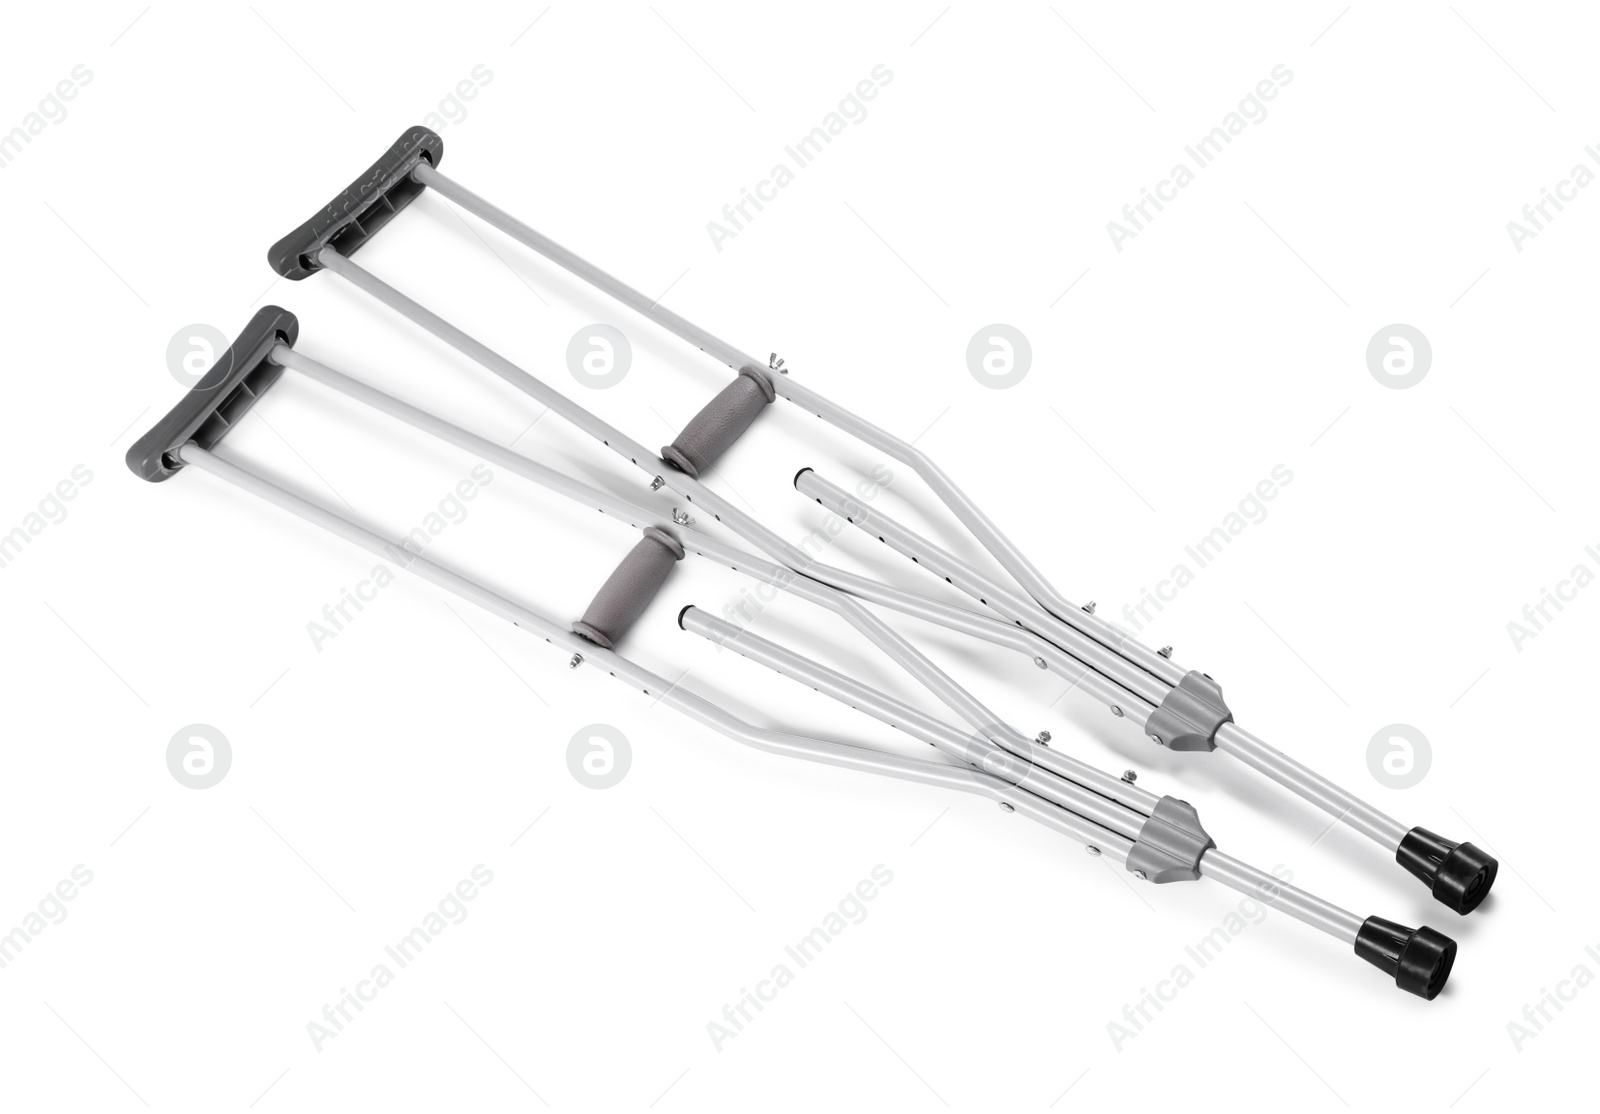 Photo of Pair of axillary crutches on white background